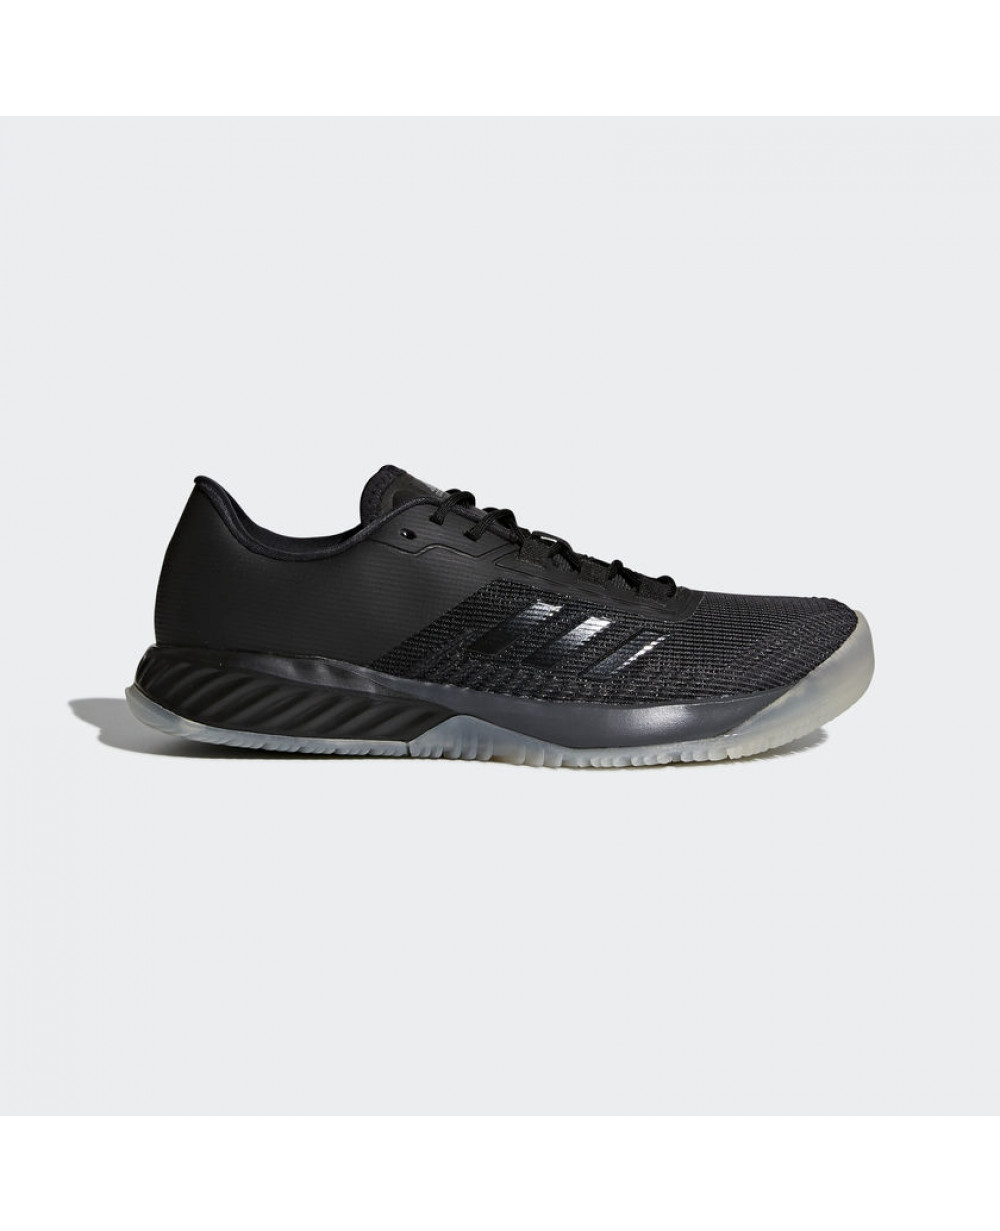 Adidas Crazy Fast Trainer Training Shoes For Men CG3102